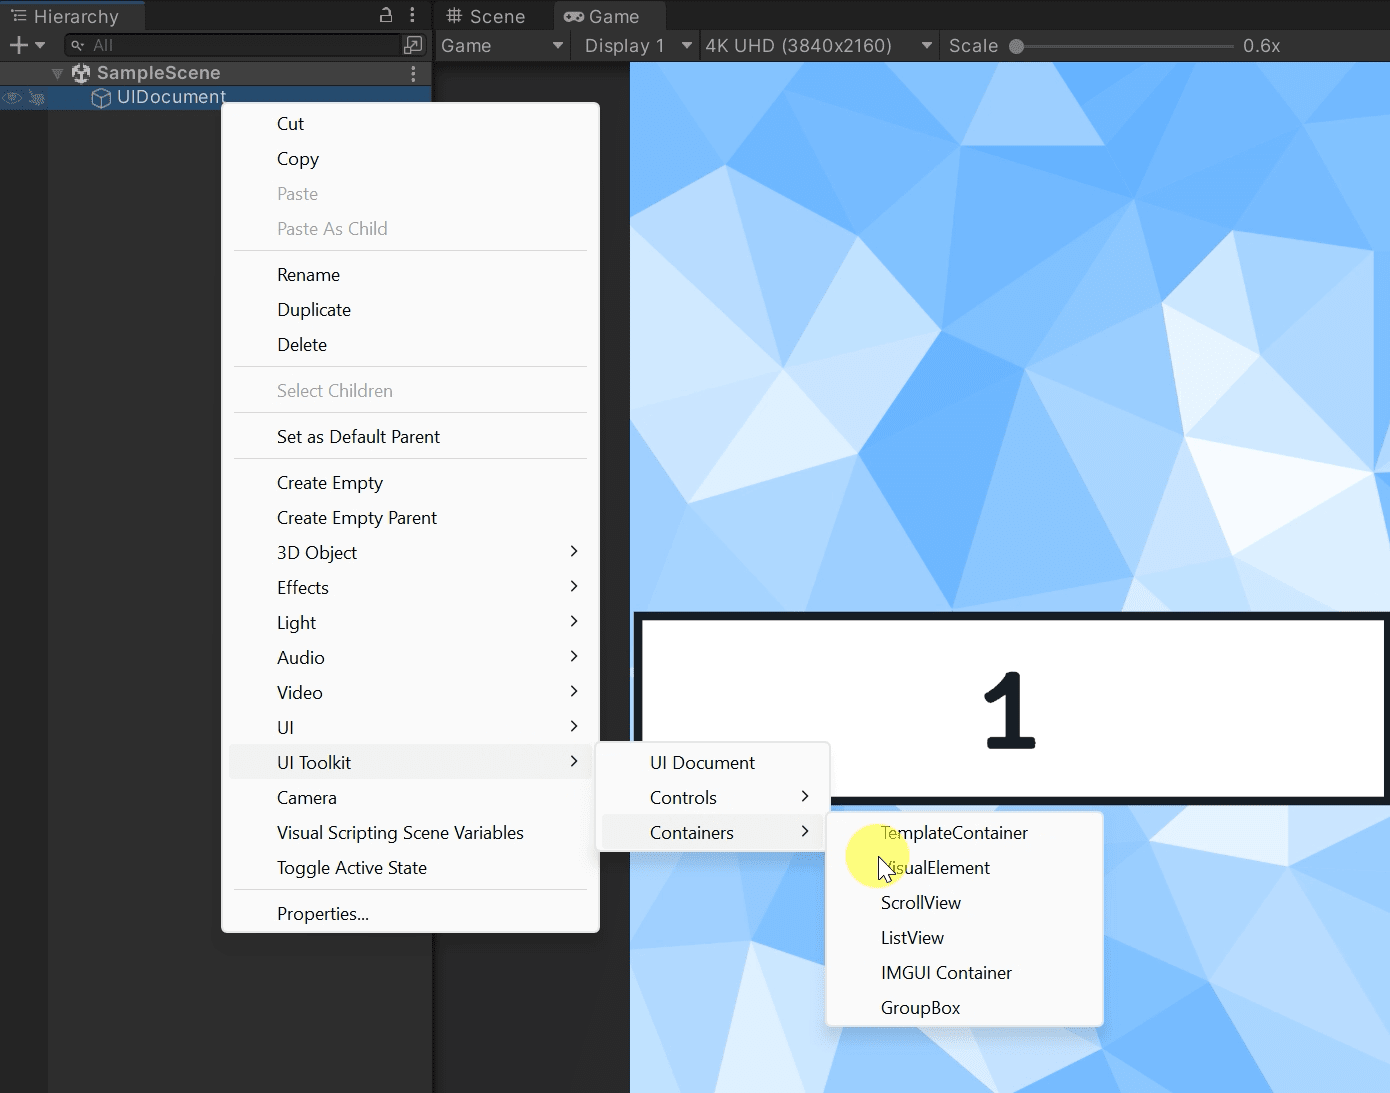 UI Toolkit Element added from Hierarchy tab